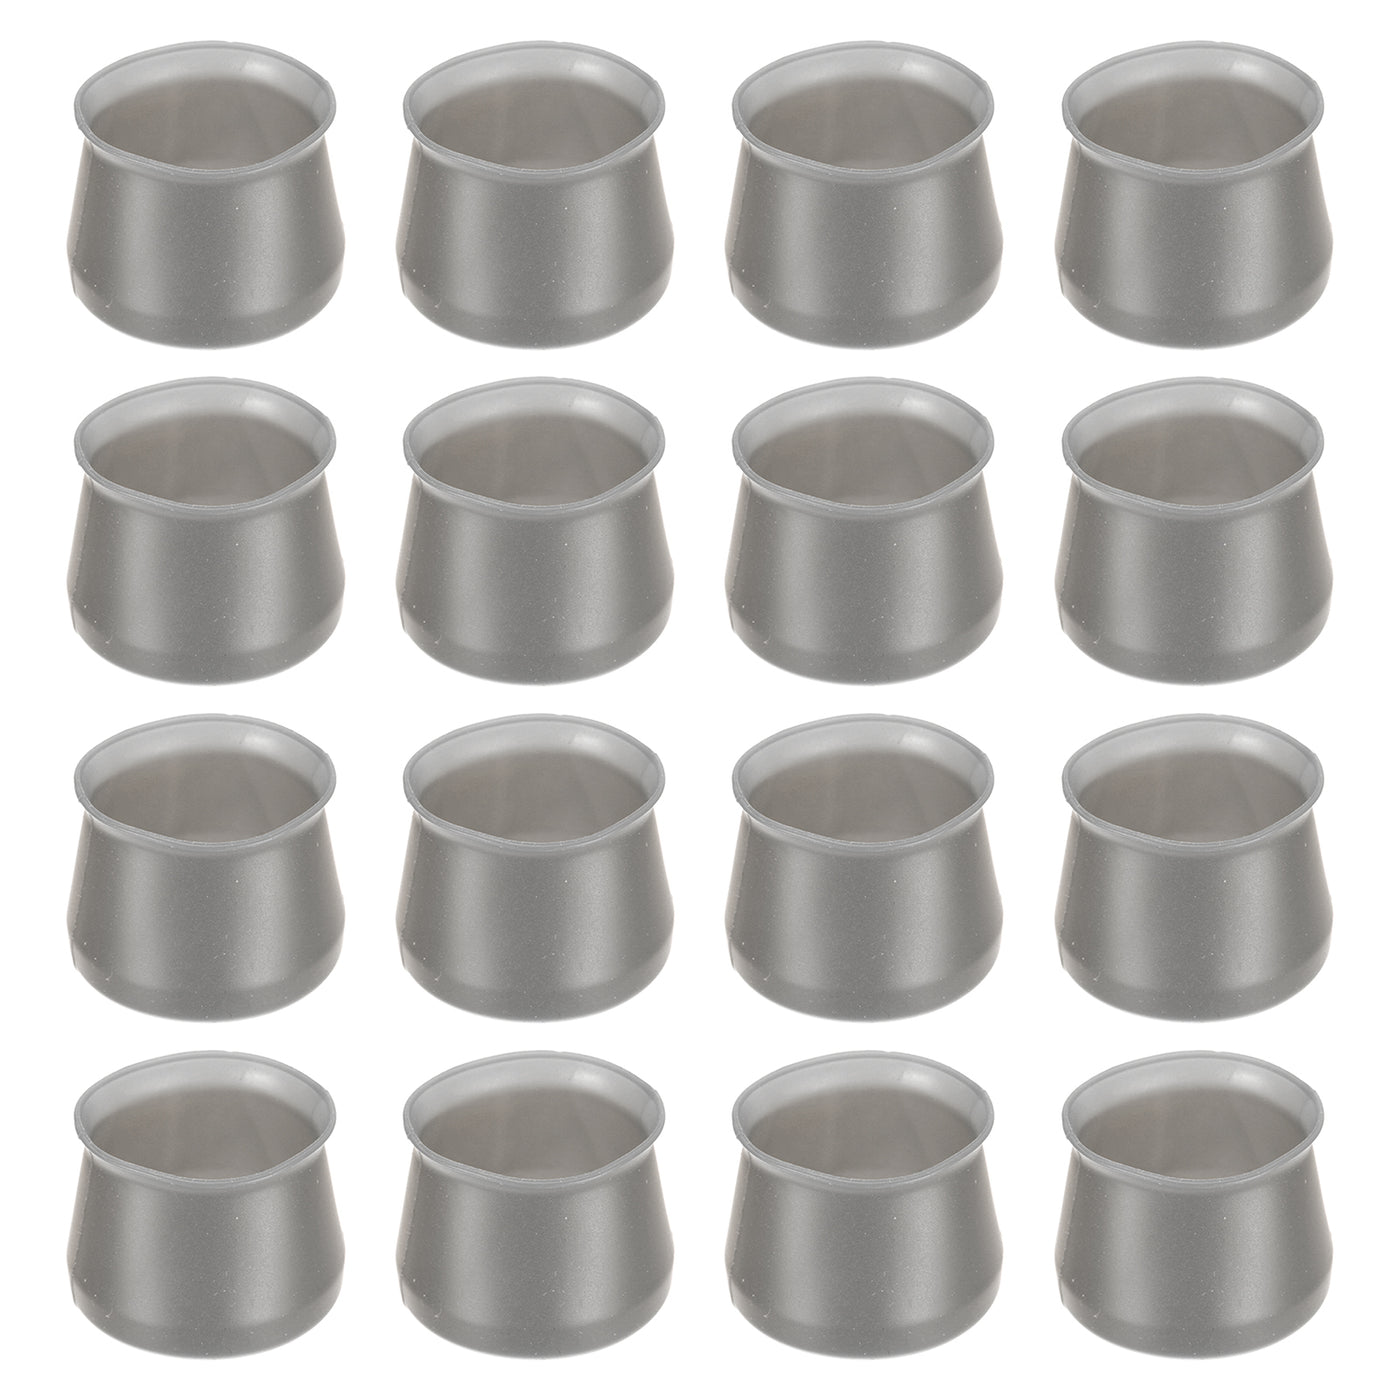 uxcell Uxcell Chair Leg Floor Protectors, 24Pcs 38mm/ 1.5" Silicone Chair Leg Cover Caps for Hardwood Floors (Dark Gray)